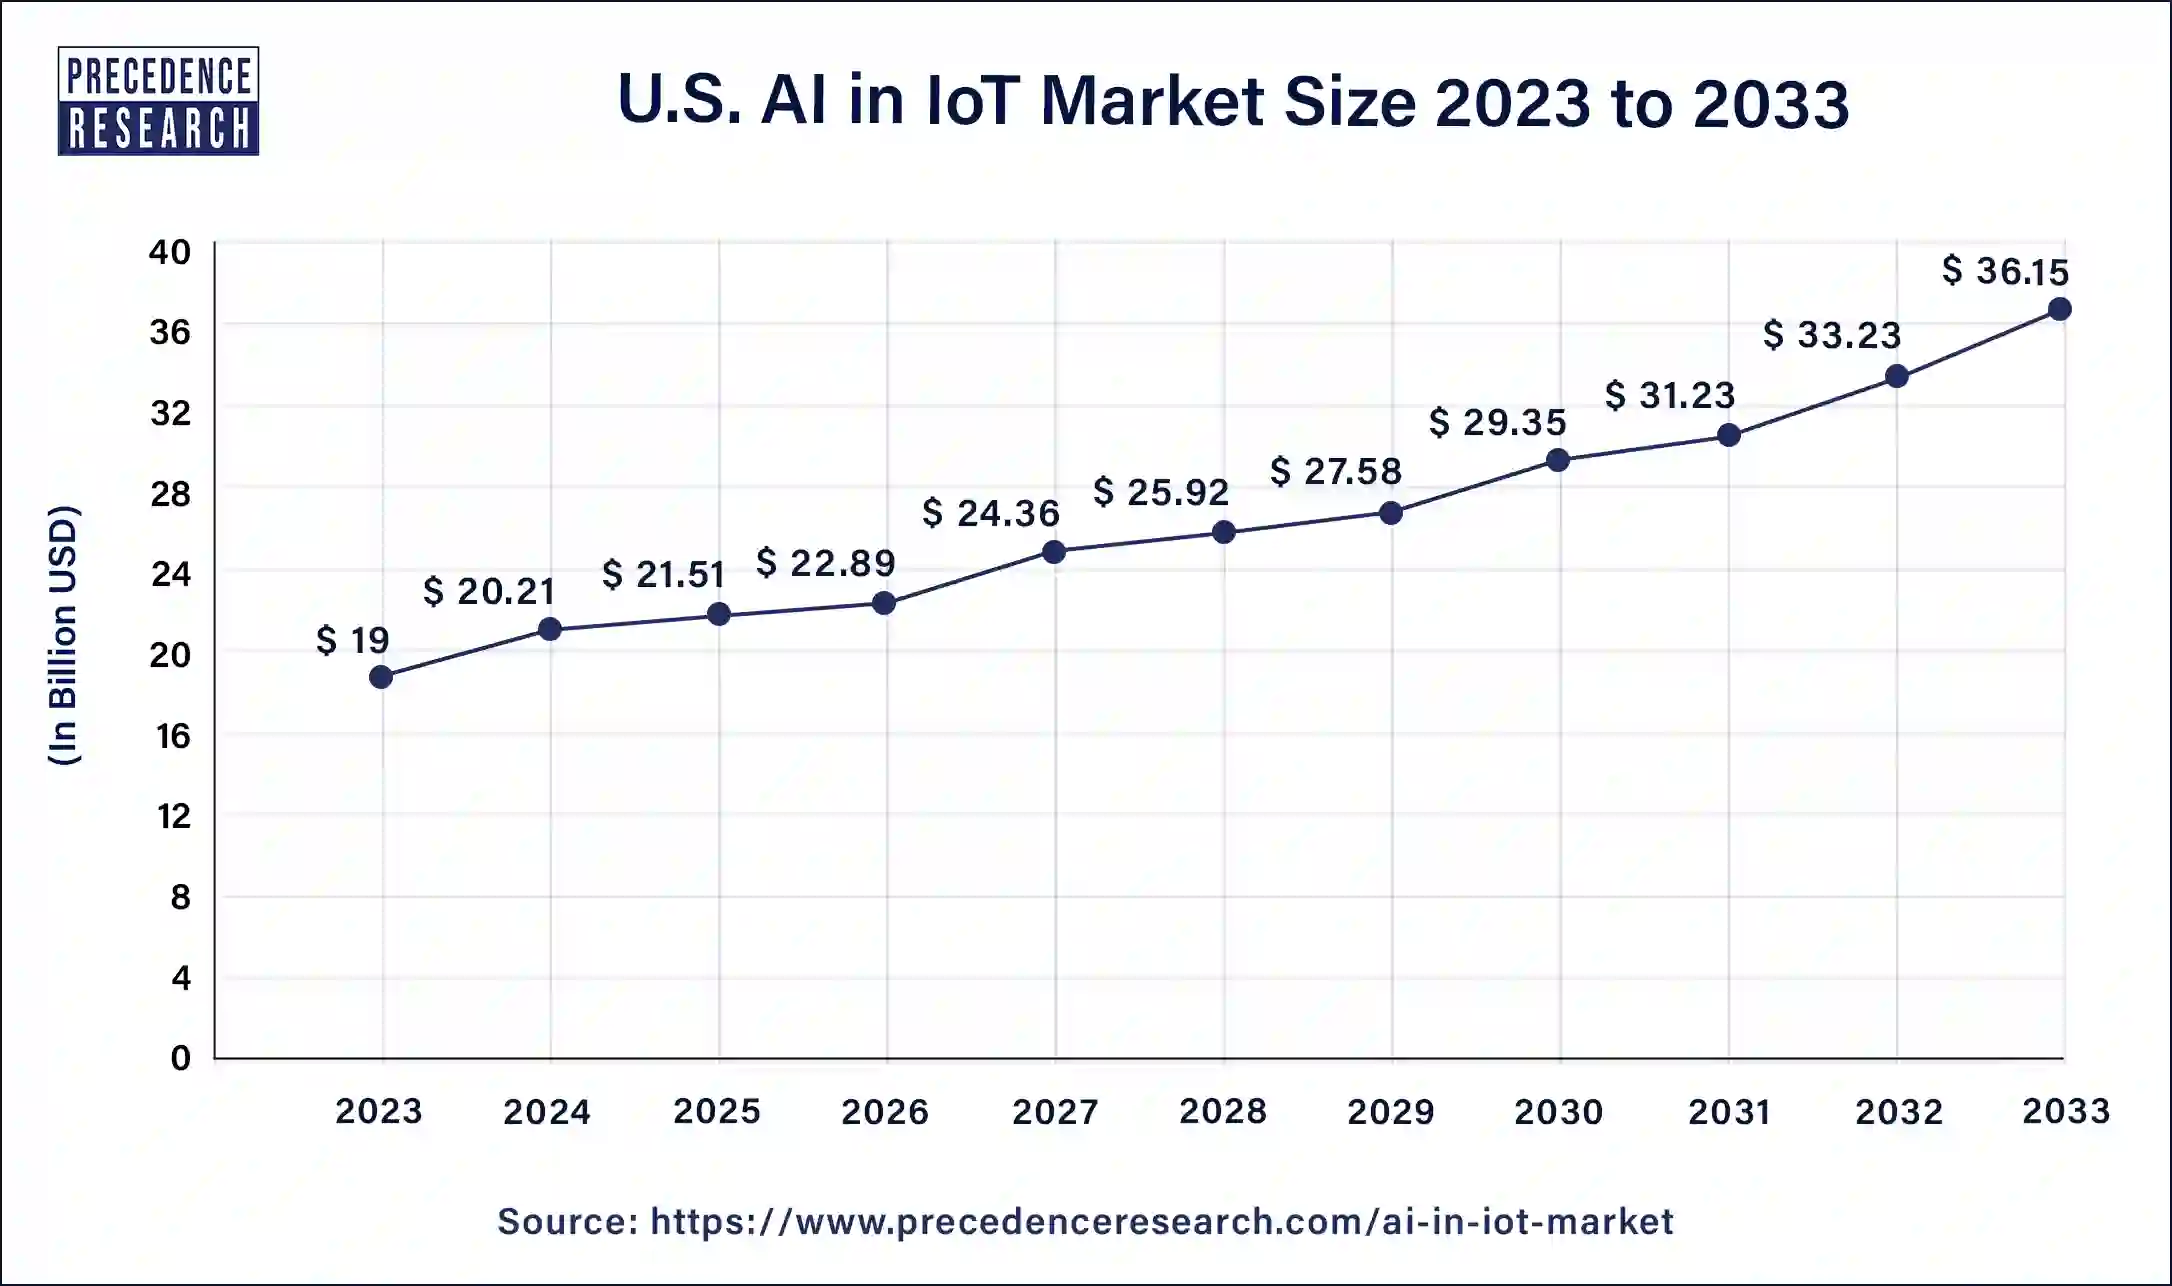 U.S. AI in IoT Market Size 2024 to 2033